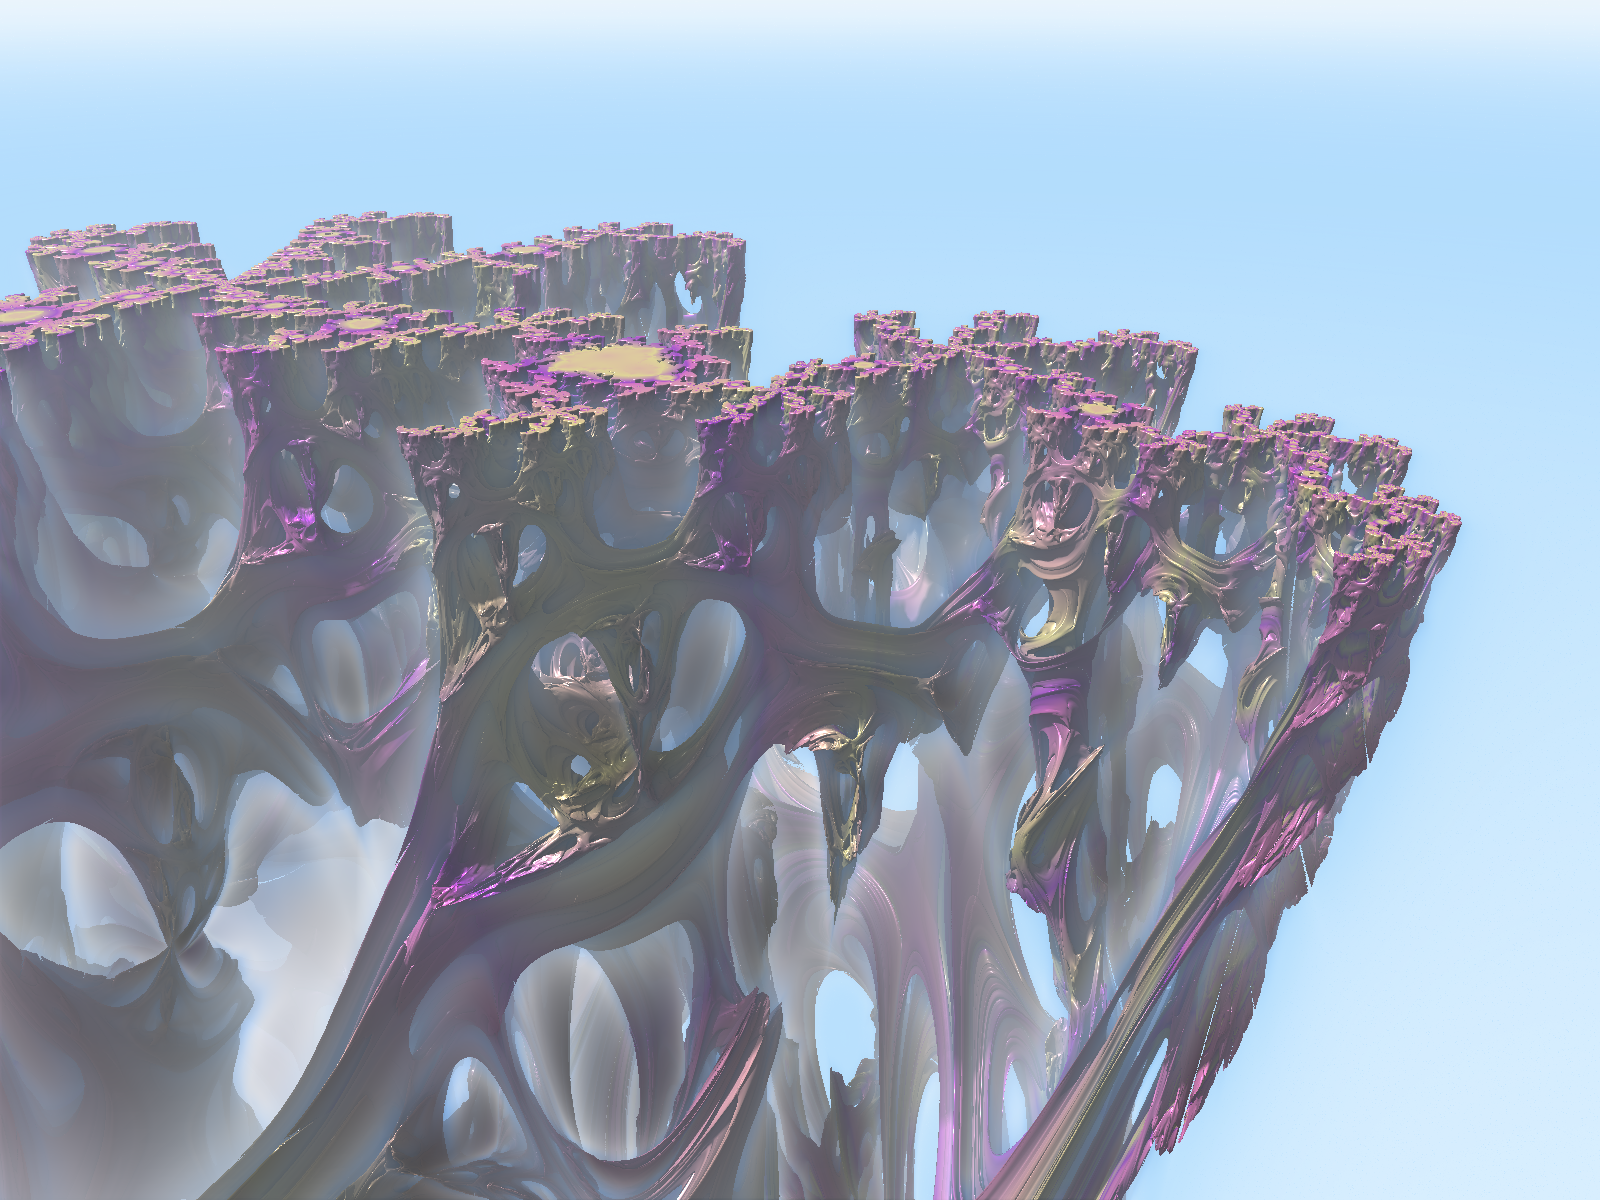 Self-Similarity of Erosion Marks mapped to Voxel Slices